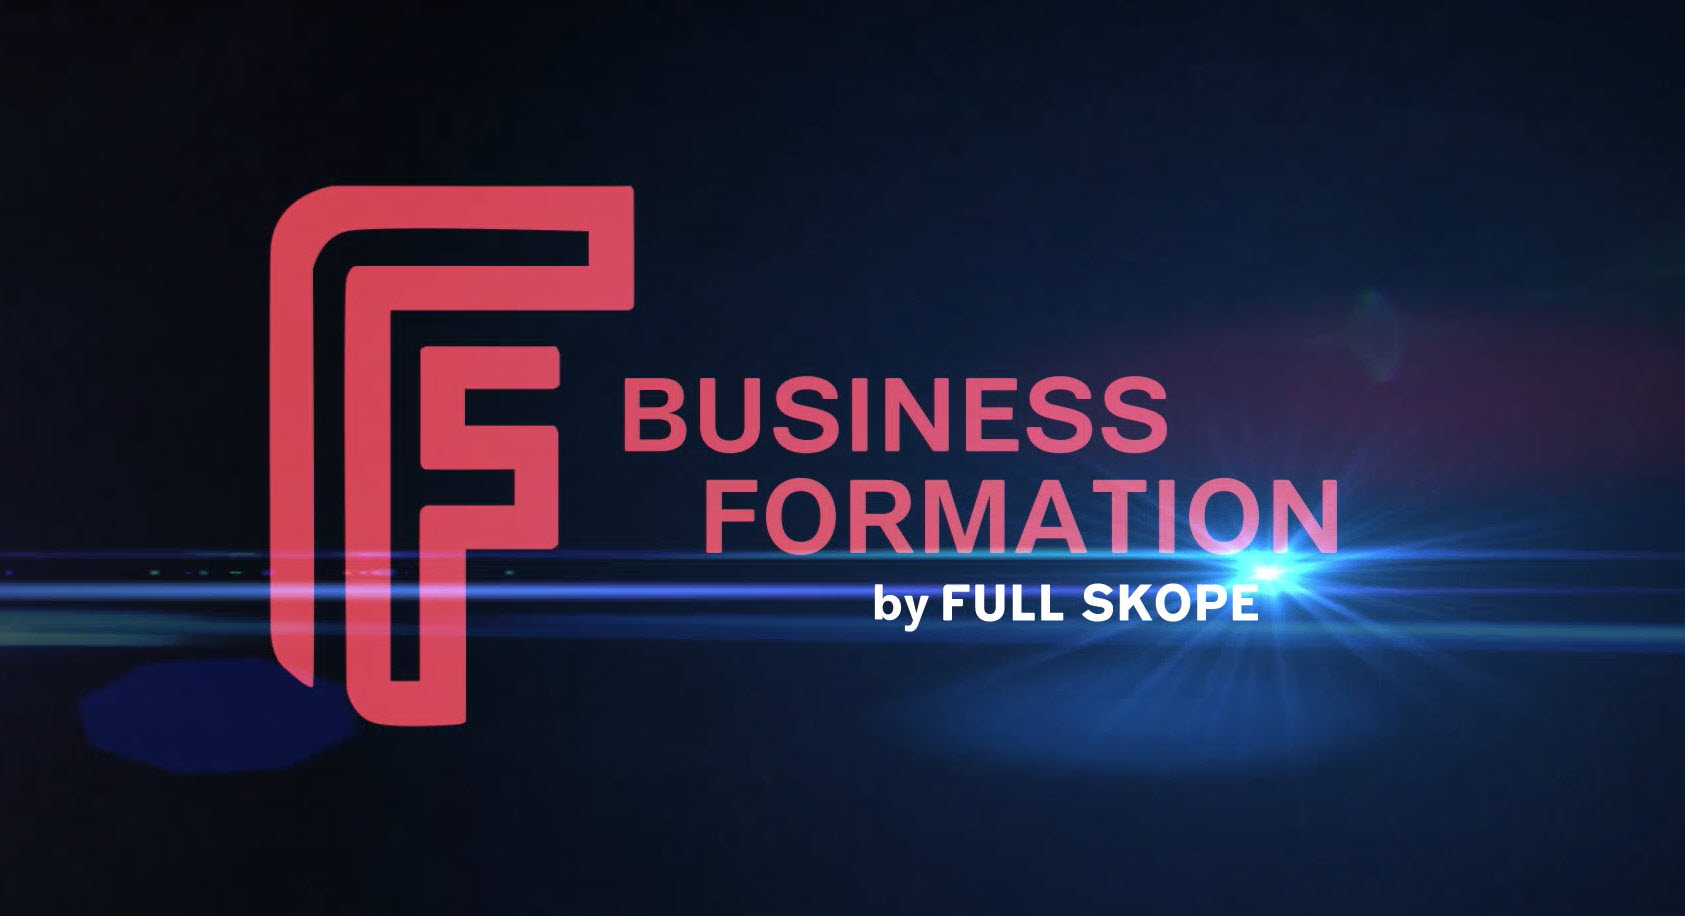 Business Formation by Full Skope